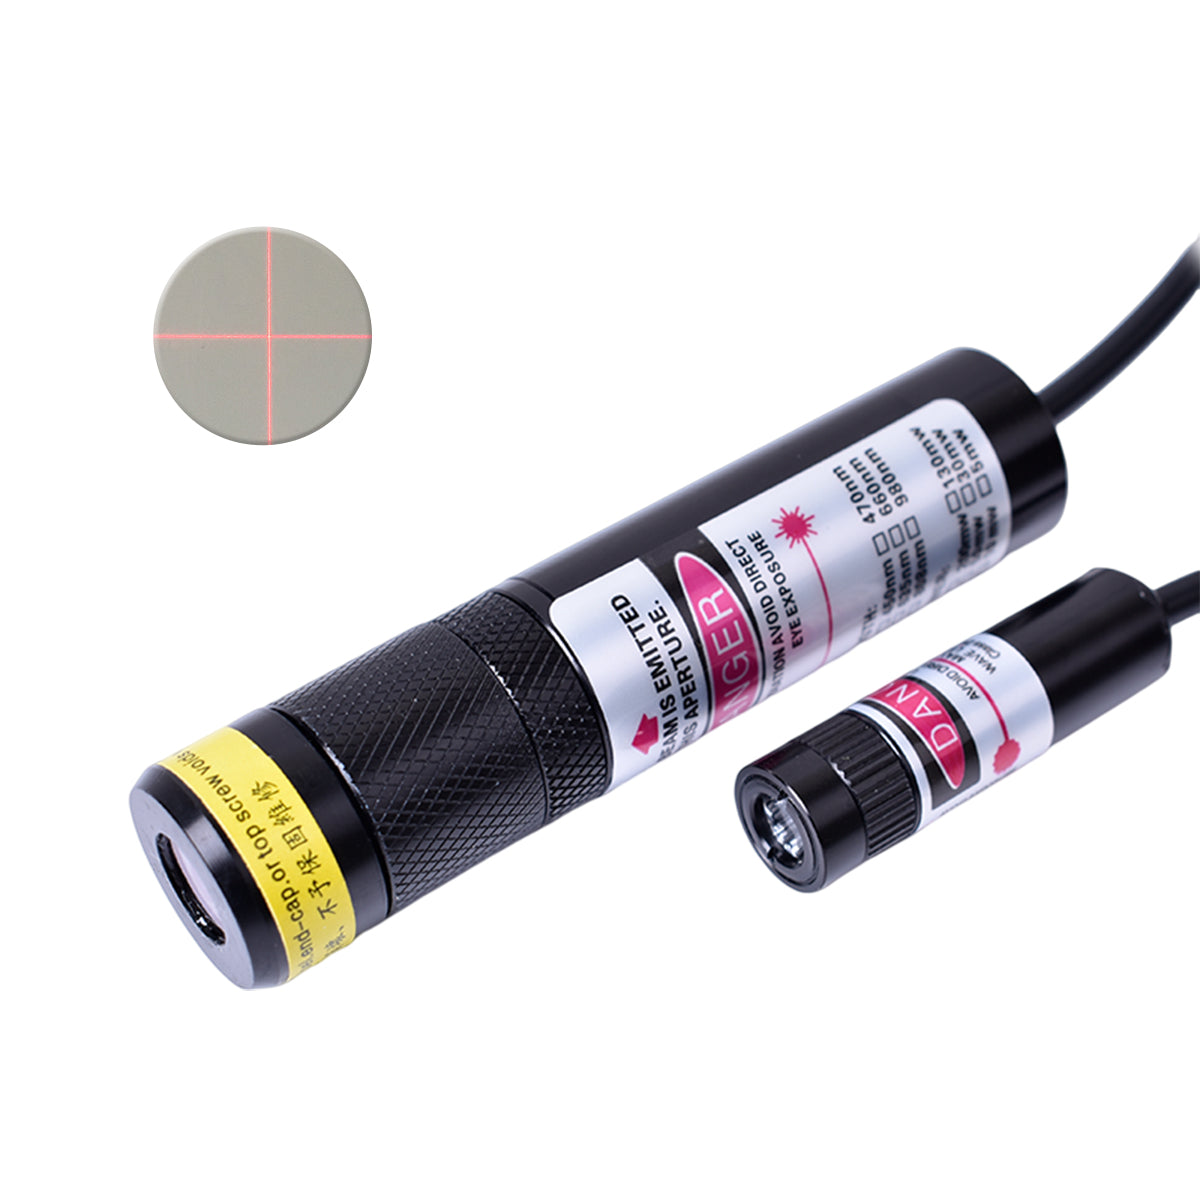 Red Light Cross Positioner 660nm 100mw Laser Module Focusable Beam Locator For Woodworking Carving Machine